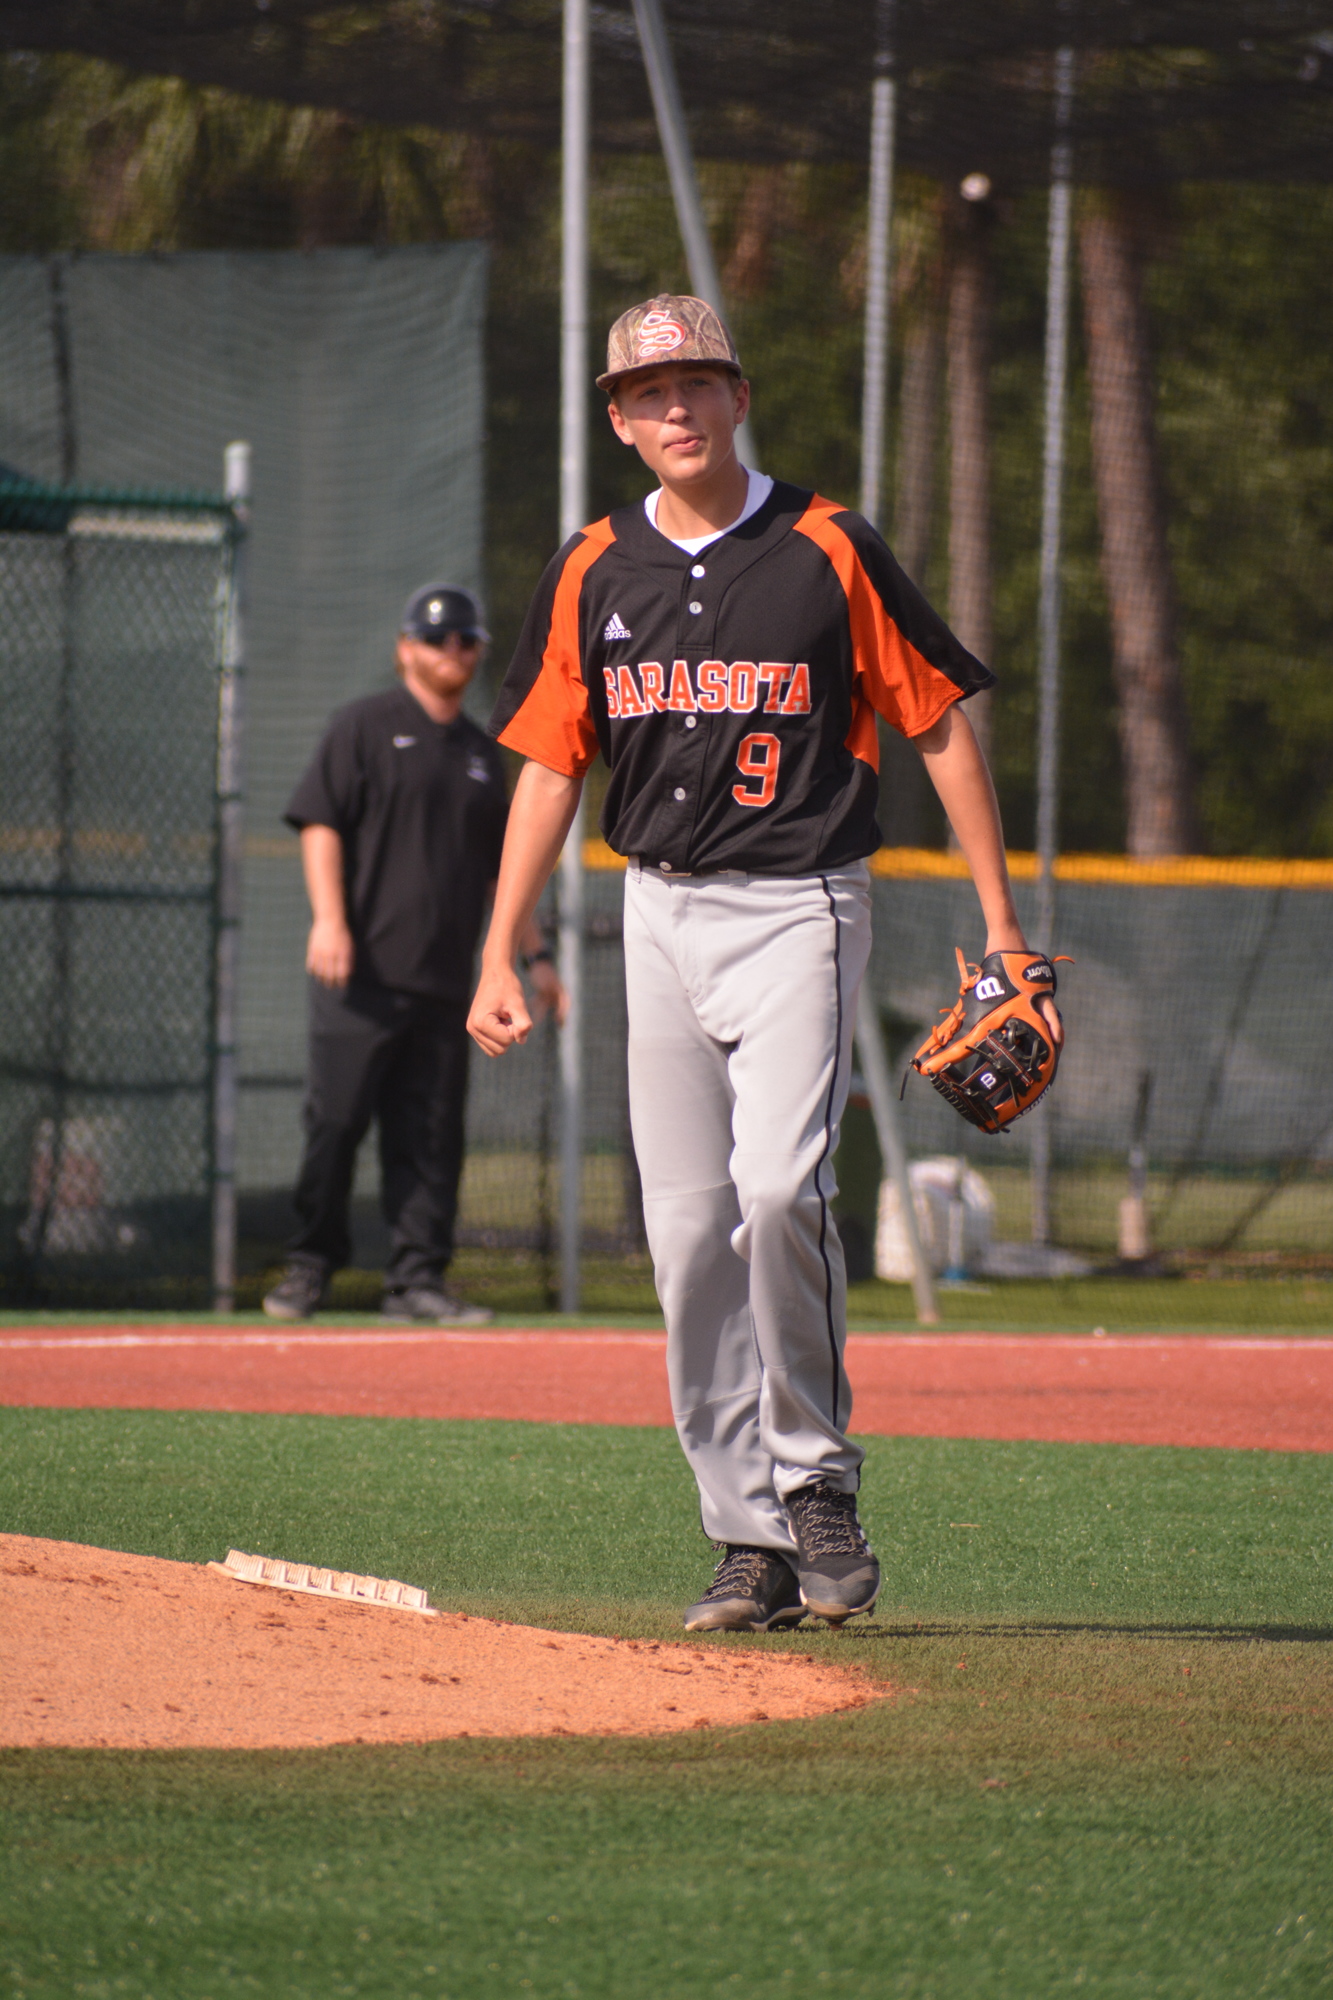 Conner Whittaker walks to the mound after making a diving defensive play.